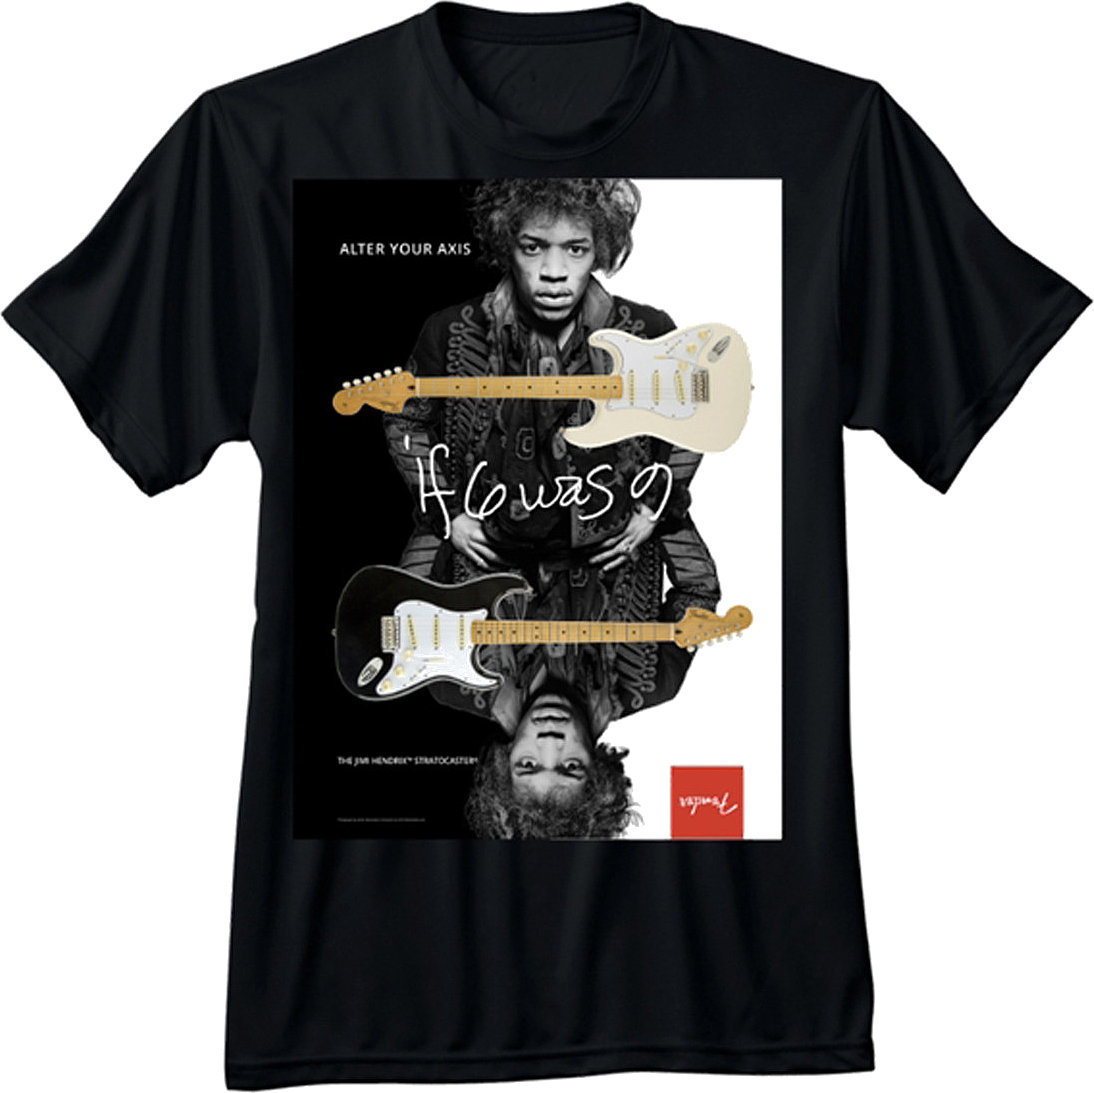 Skjorta Fender Jimi Hendrix Collection Alter Your Axis T-Shirt Black L